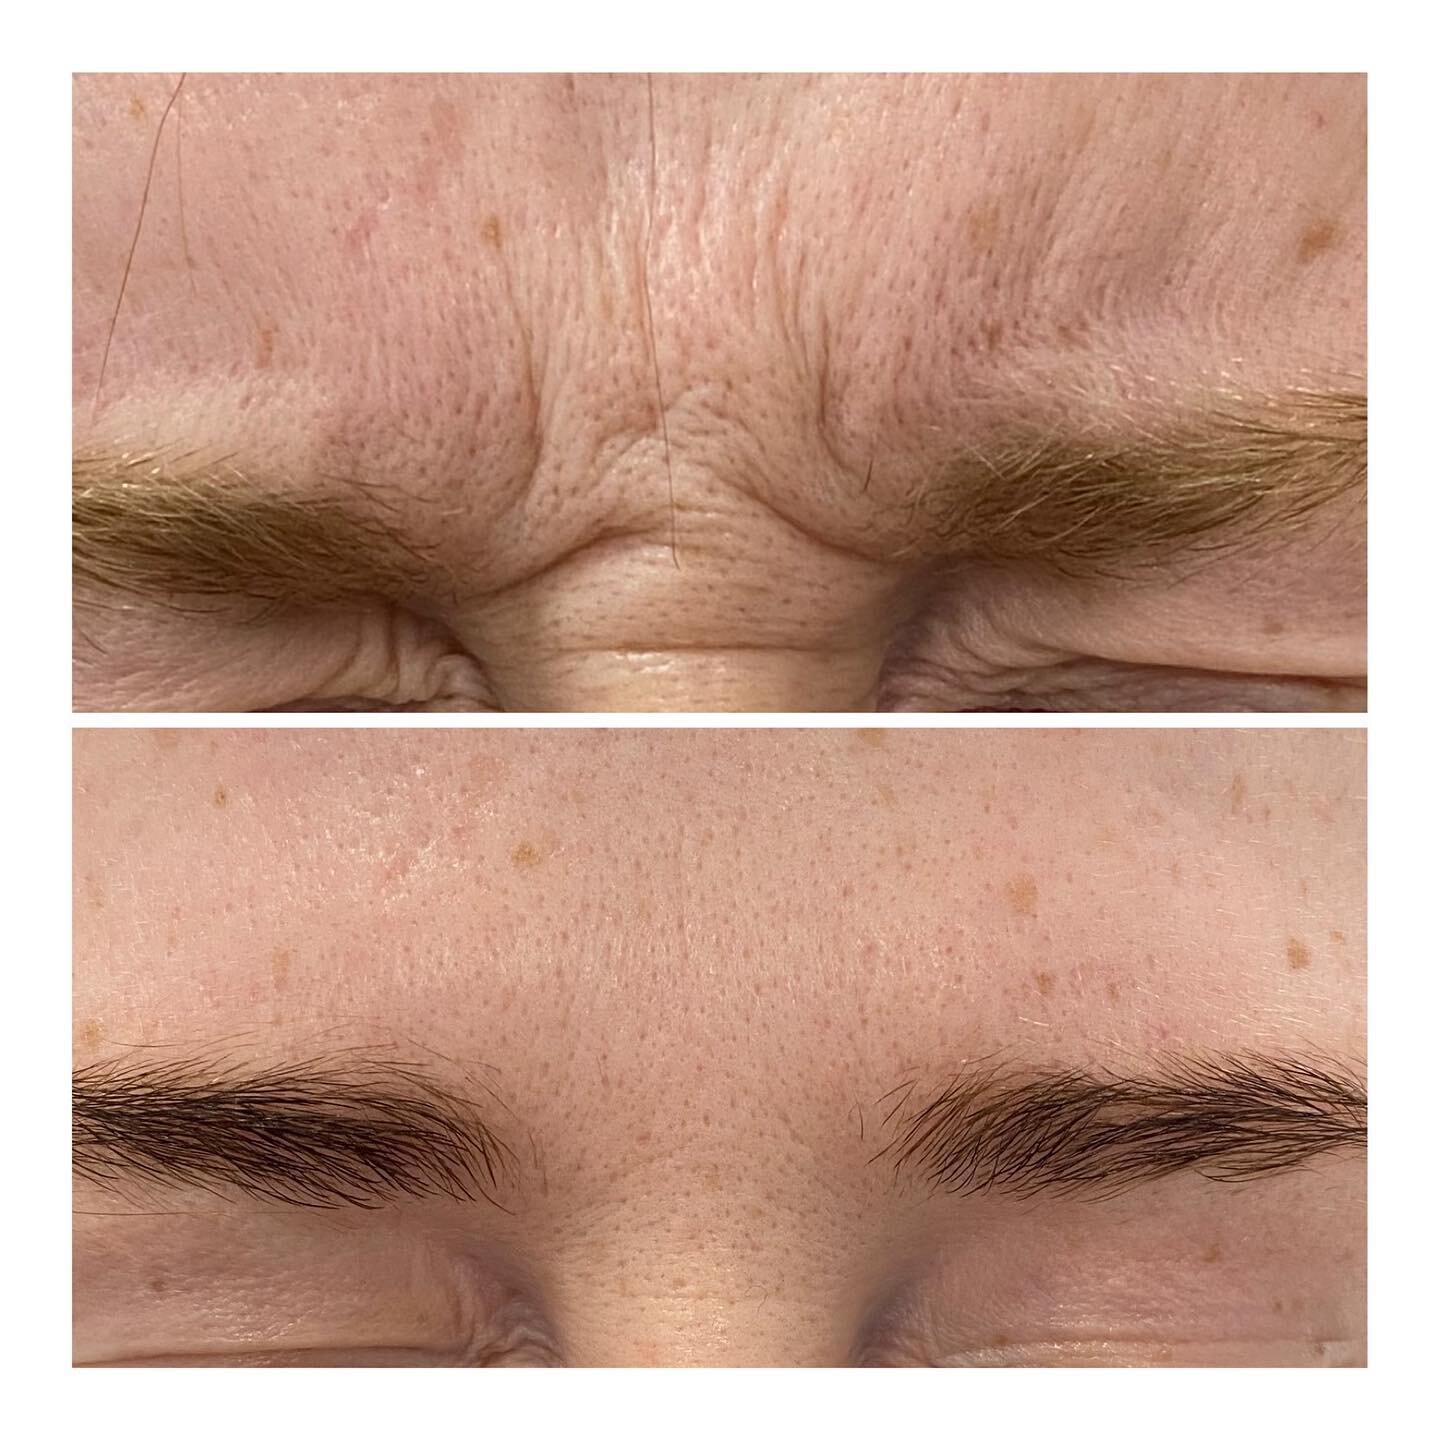 🩼🩼Anti-wrinkle treatment of the frown muscles - a popular treatment with minimal downtime and fantastic results. Lasts for 3-4 months. DM for further information or to book an appointment with our injector Dr Kegan Lewis. #antiwrinkletreatment #gla